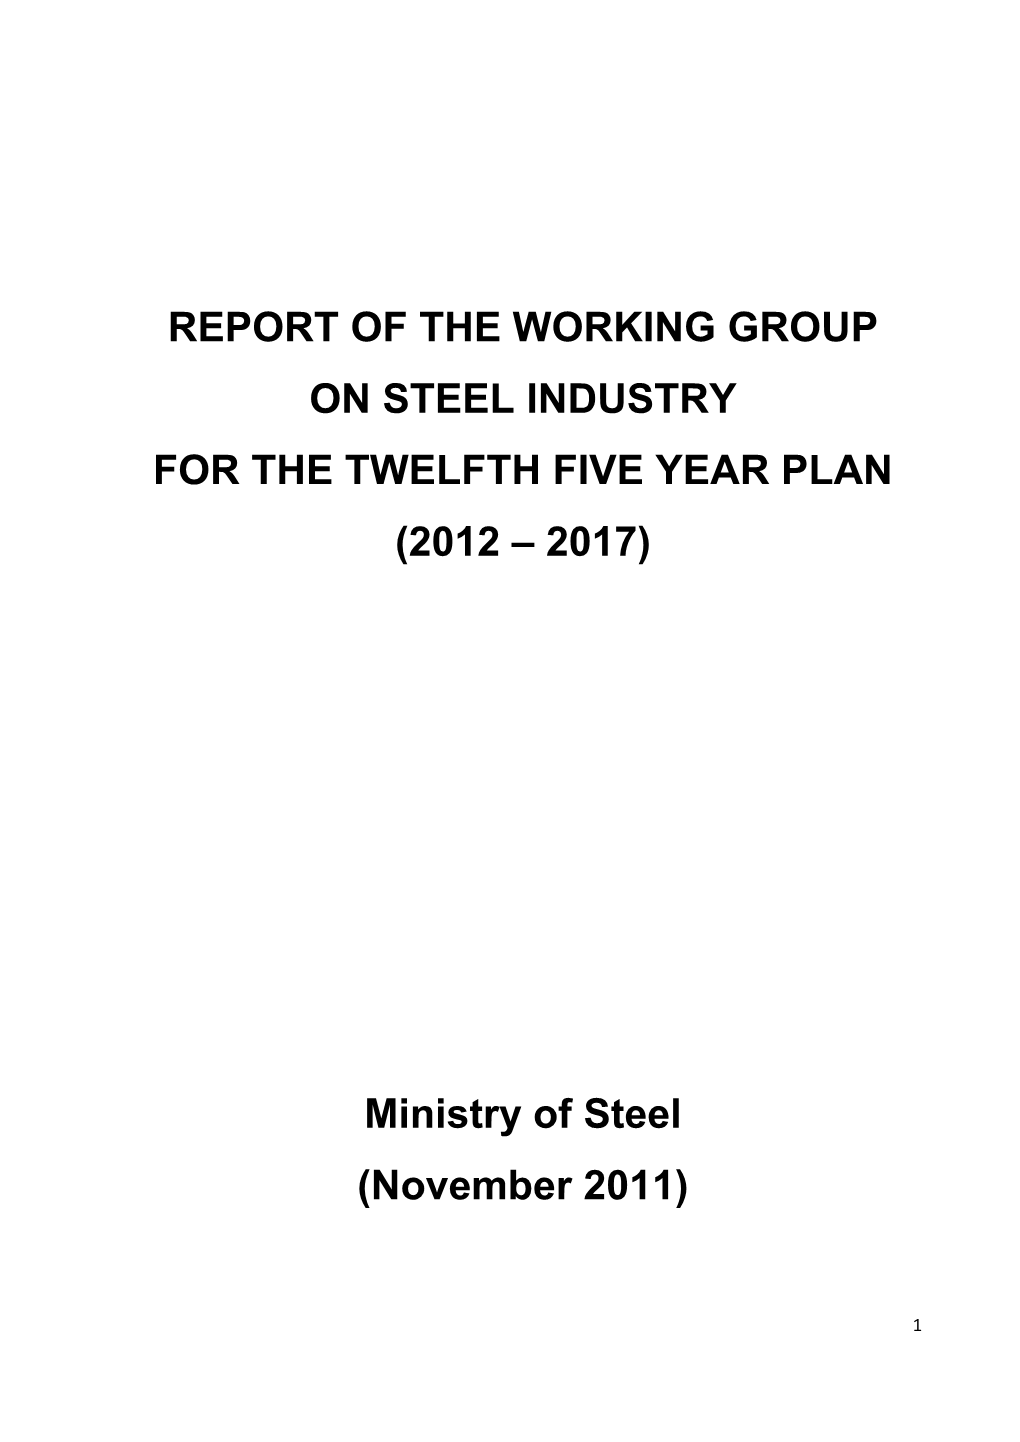 Report of the Working Group on Steel Industry for the Twelfth Five Year Plan (2012 – 2017)